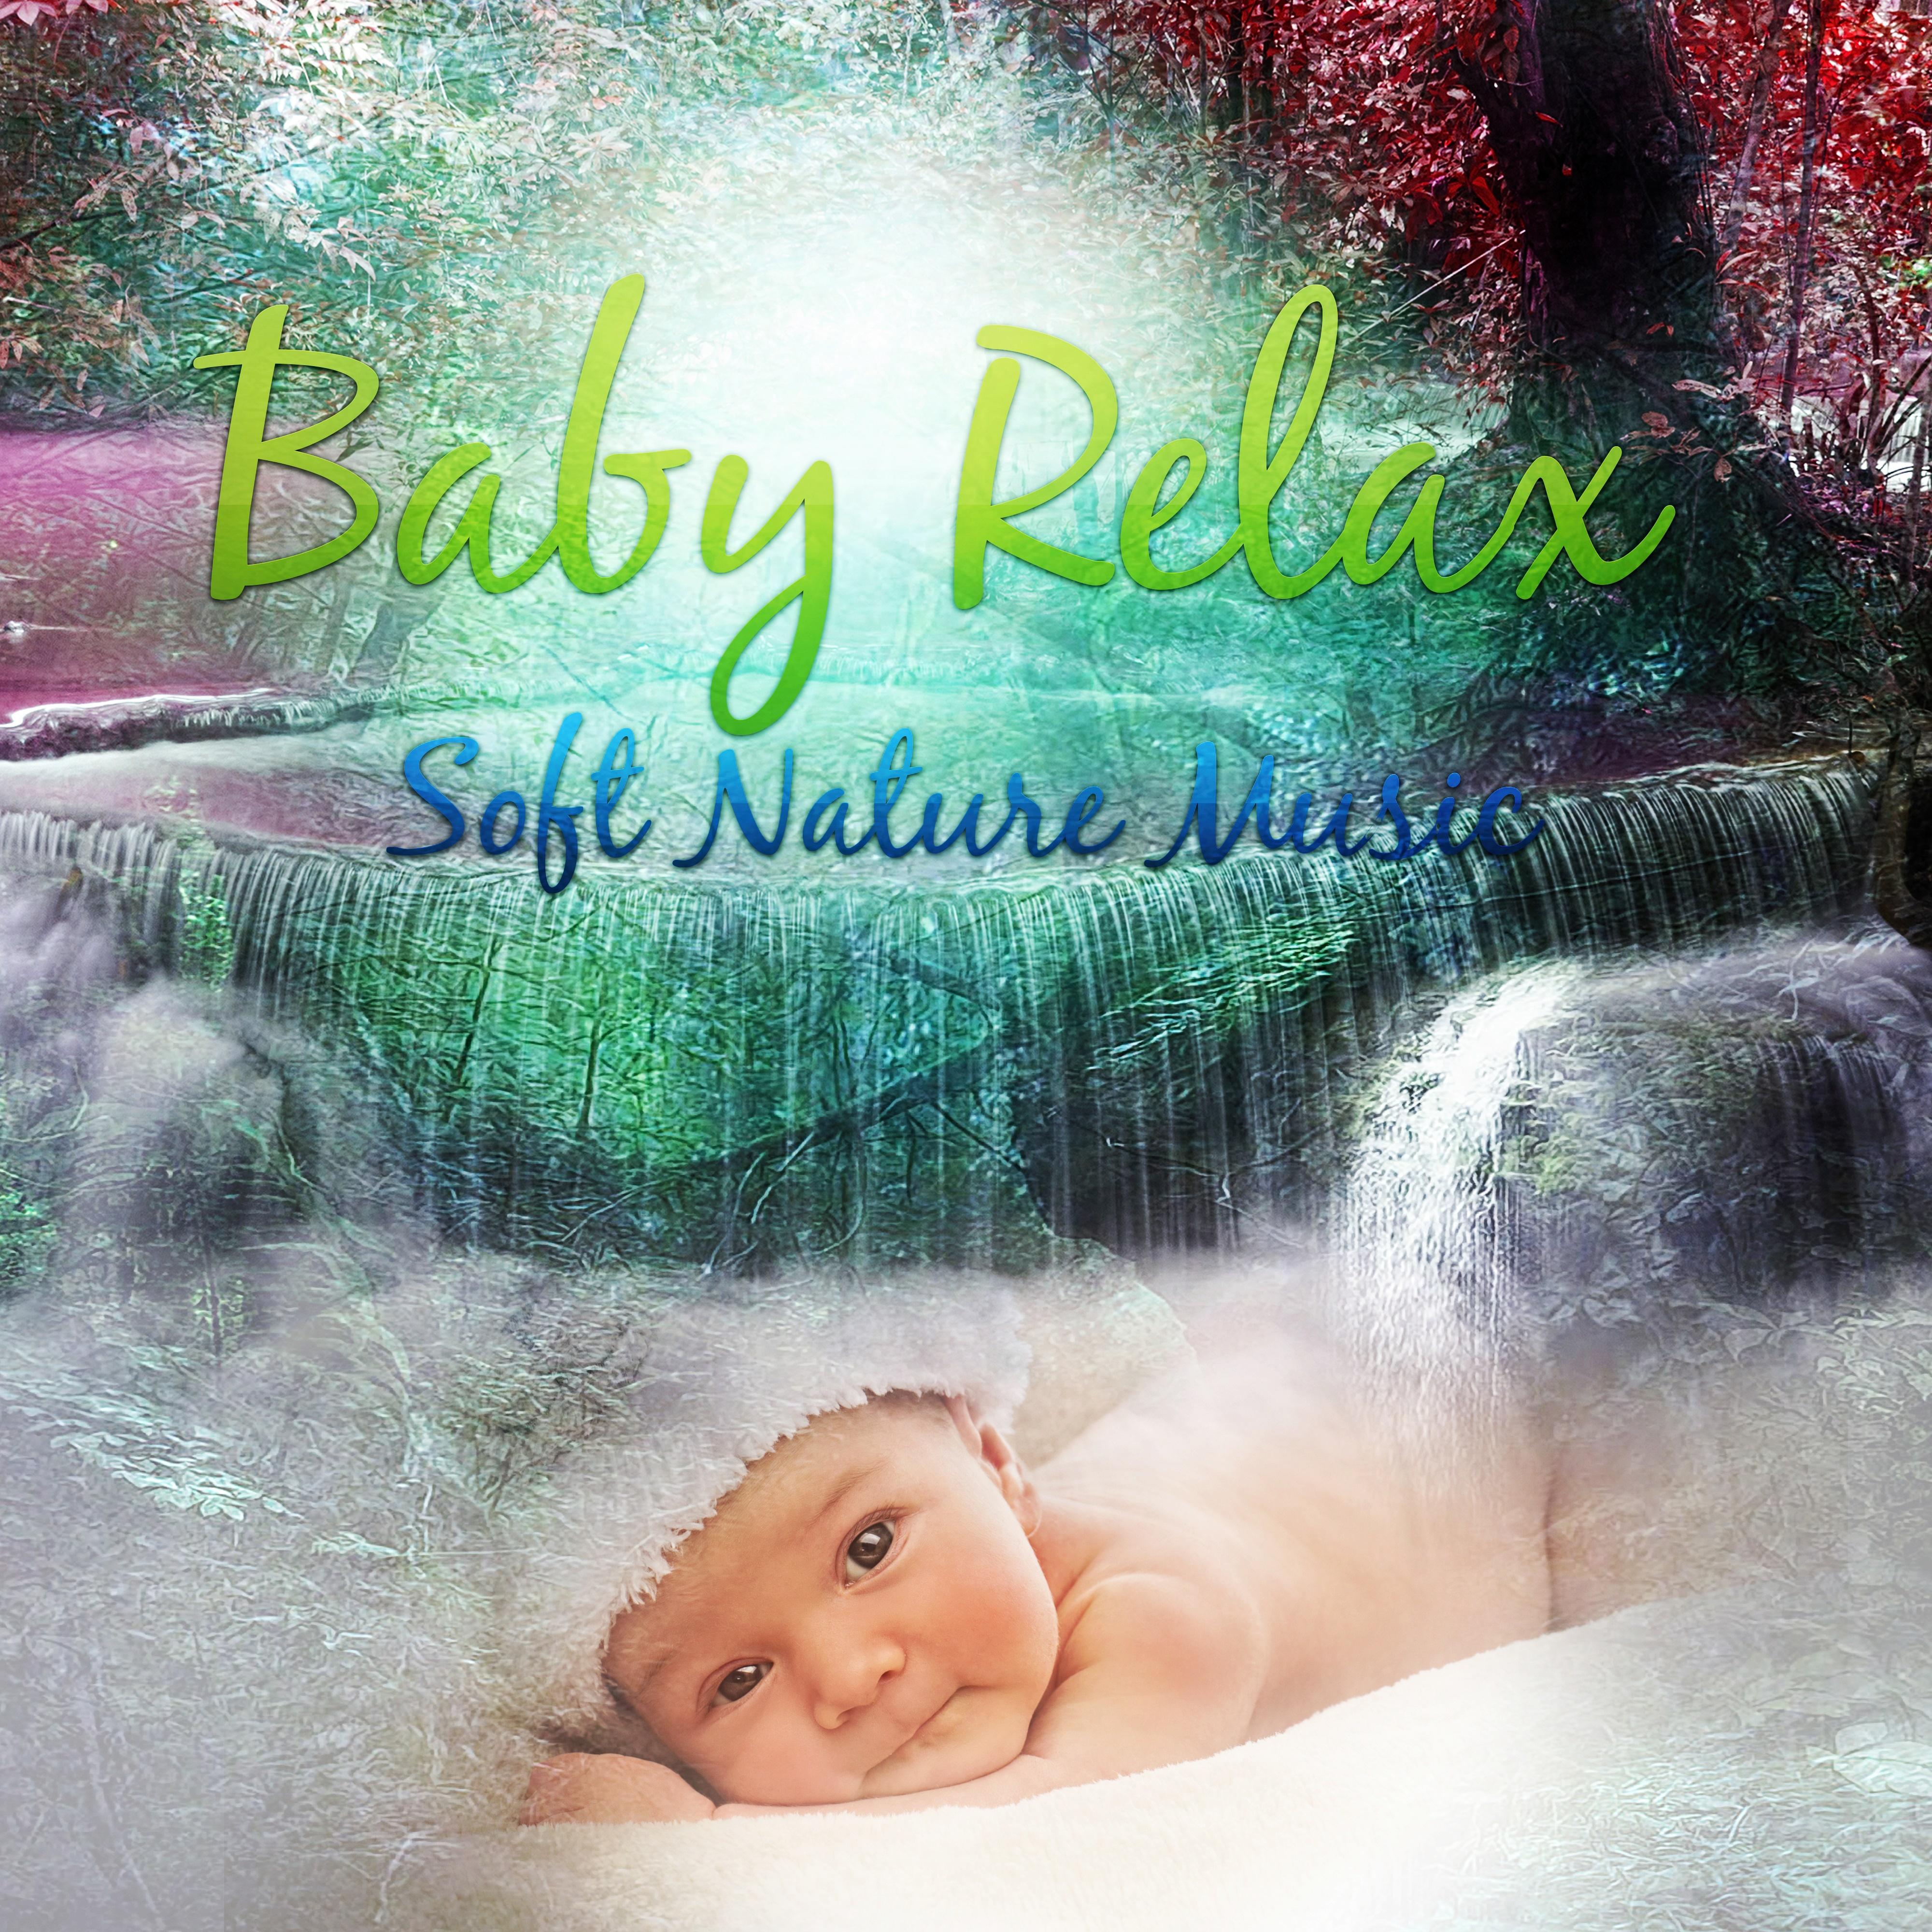 Relax Baby Music Collection - Sleep Music to Help You Relax all Night